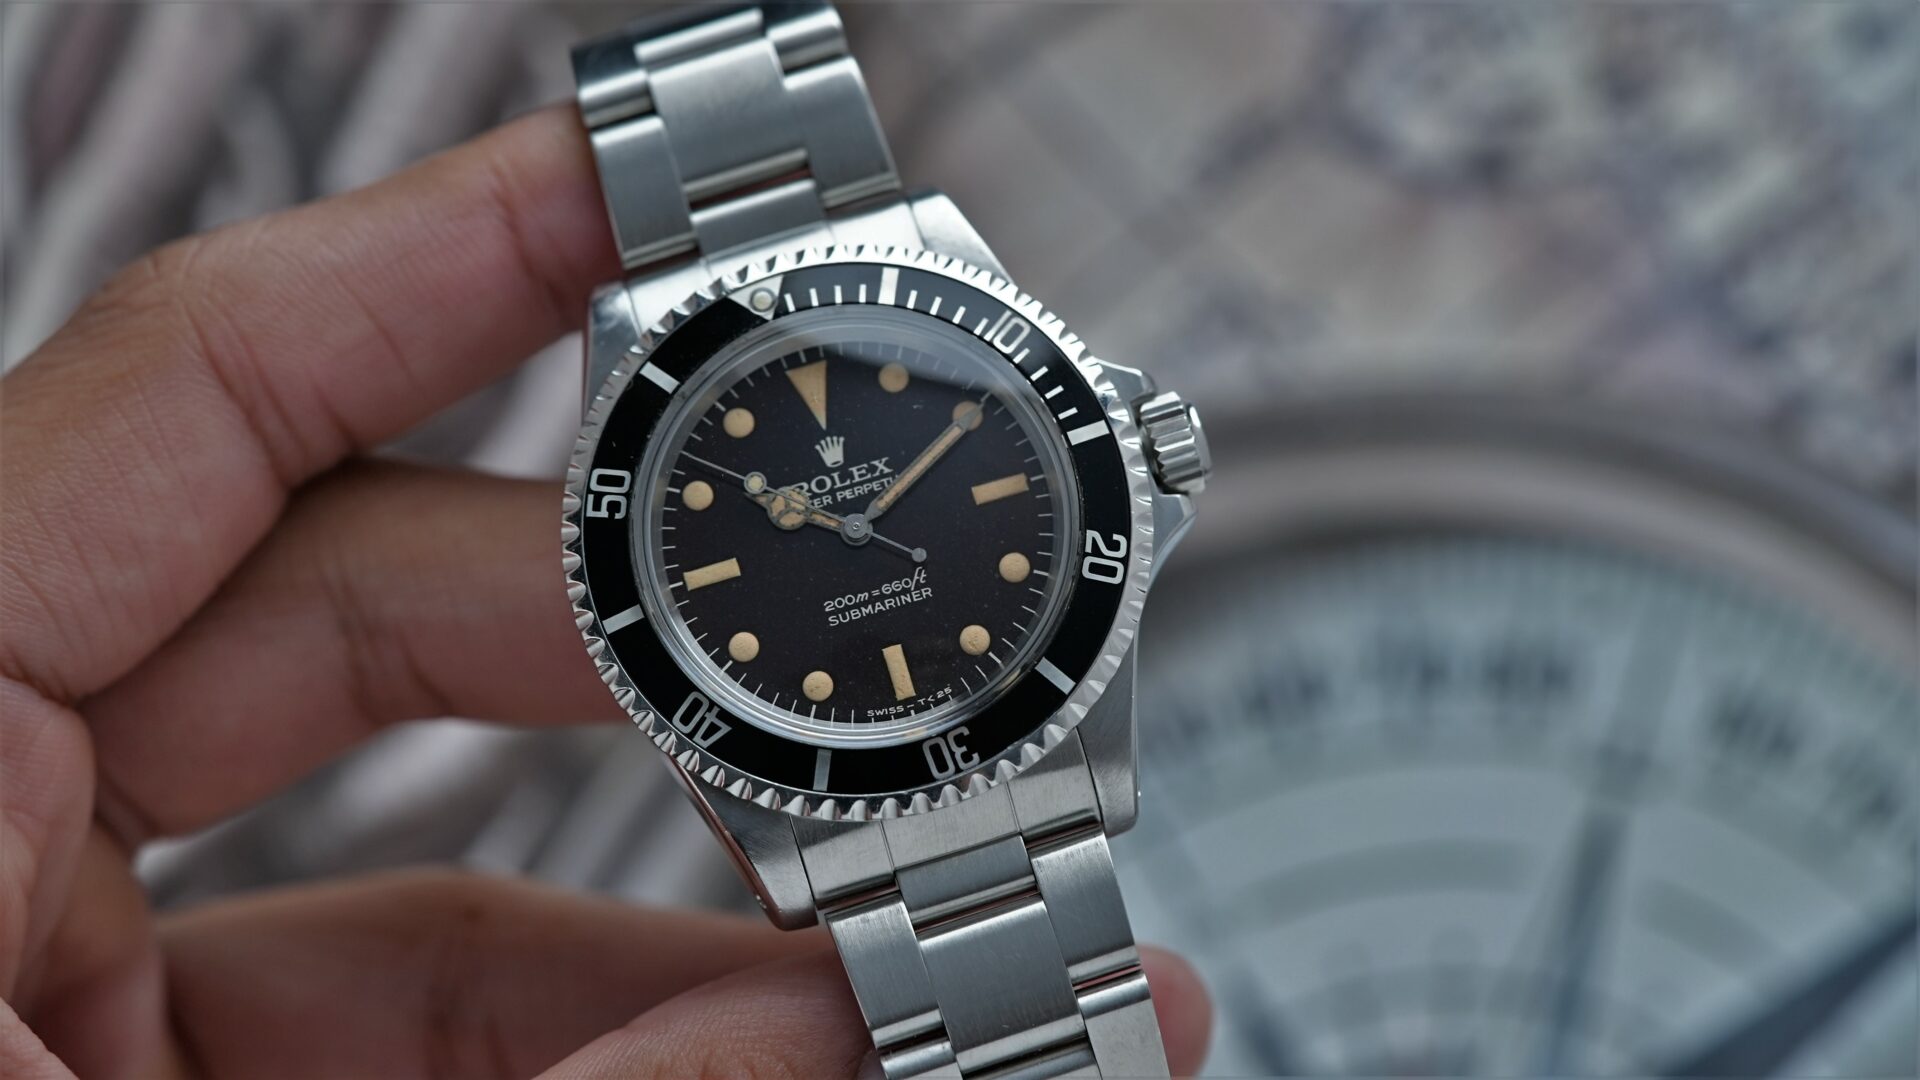 Rolex Submariner 5513 Bart Simpson Tropical Dial Original Patina Unpolished watch being displayed in hand.